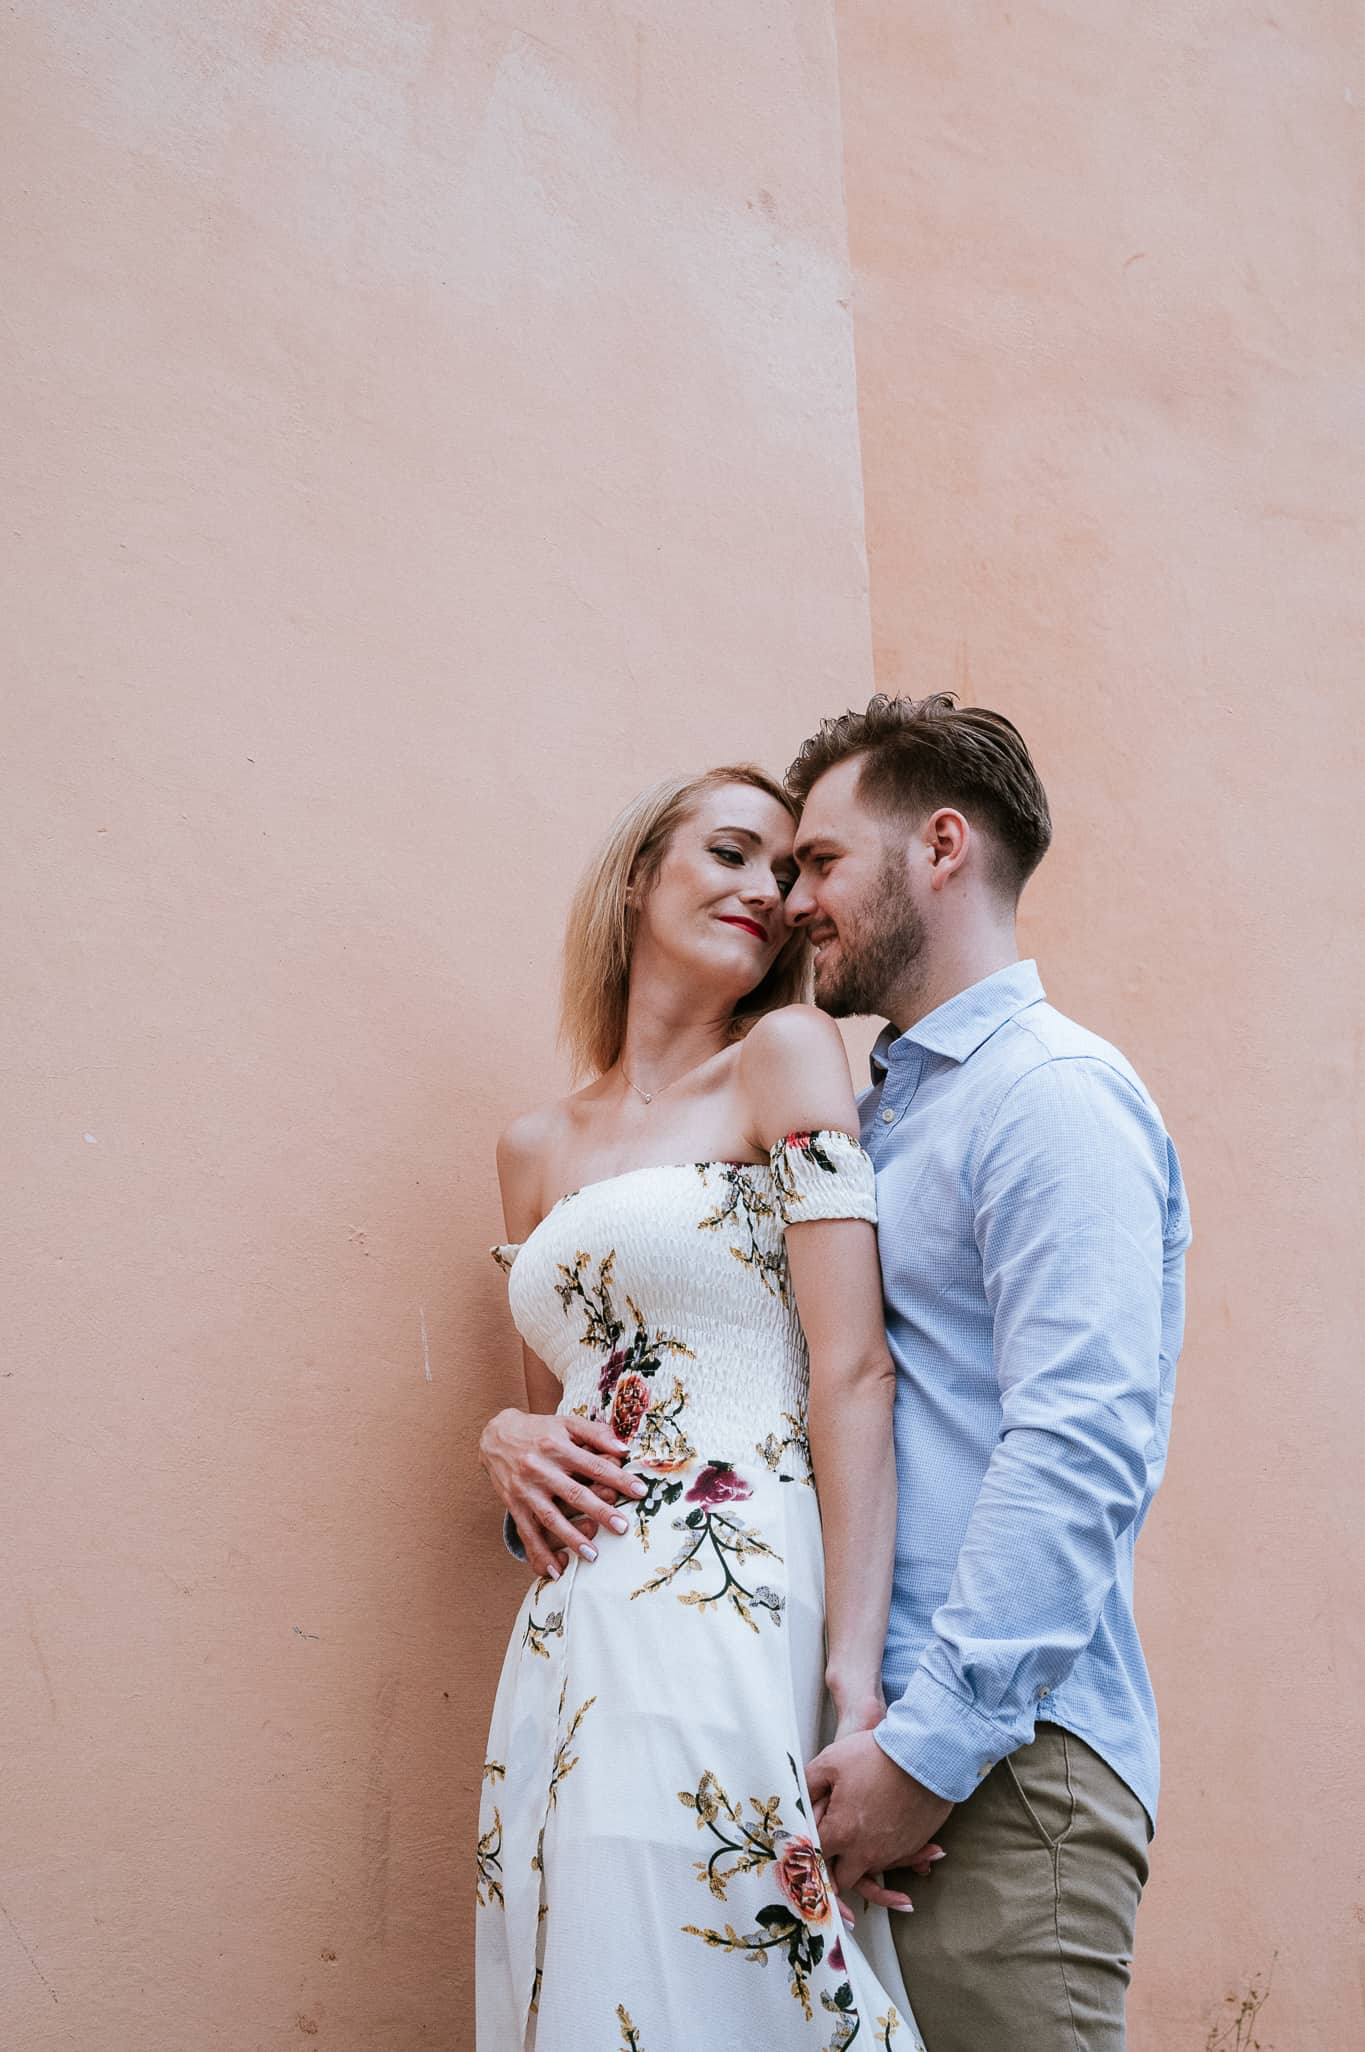 couple nuzzling during engagement photoshoot on the streets of Rome Italy 